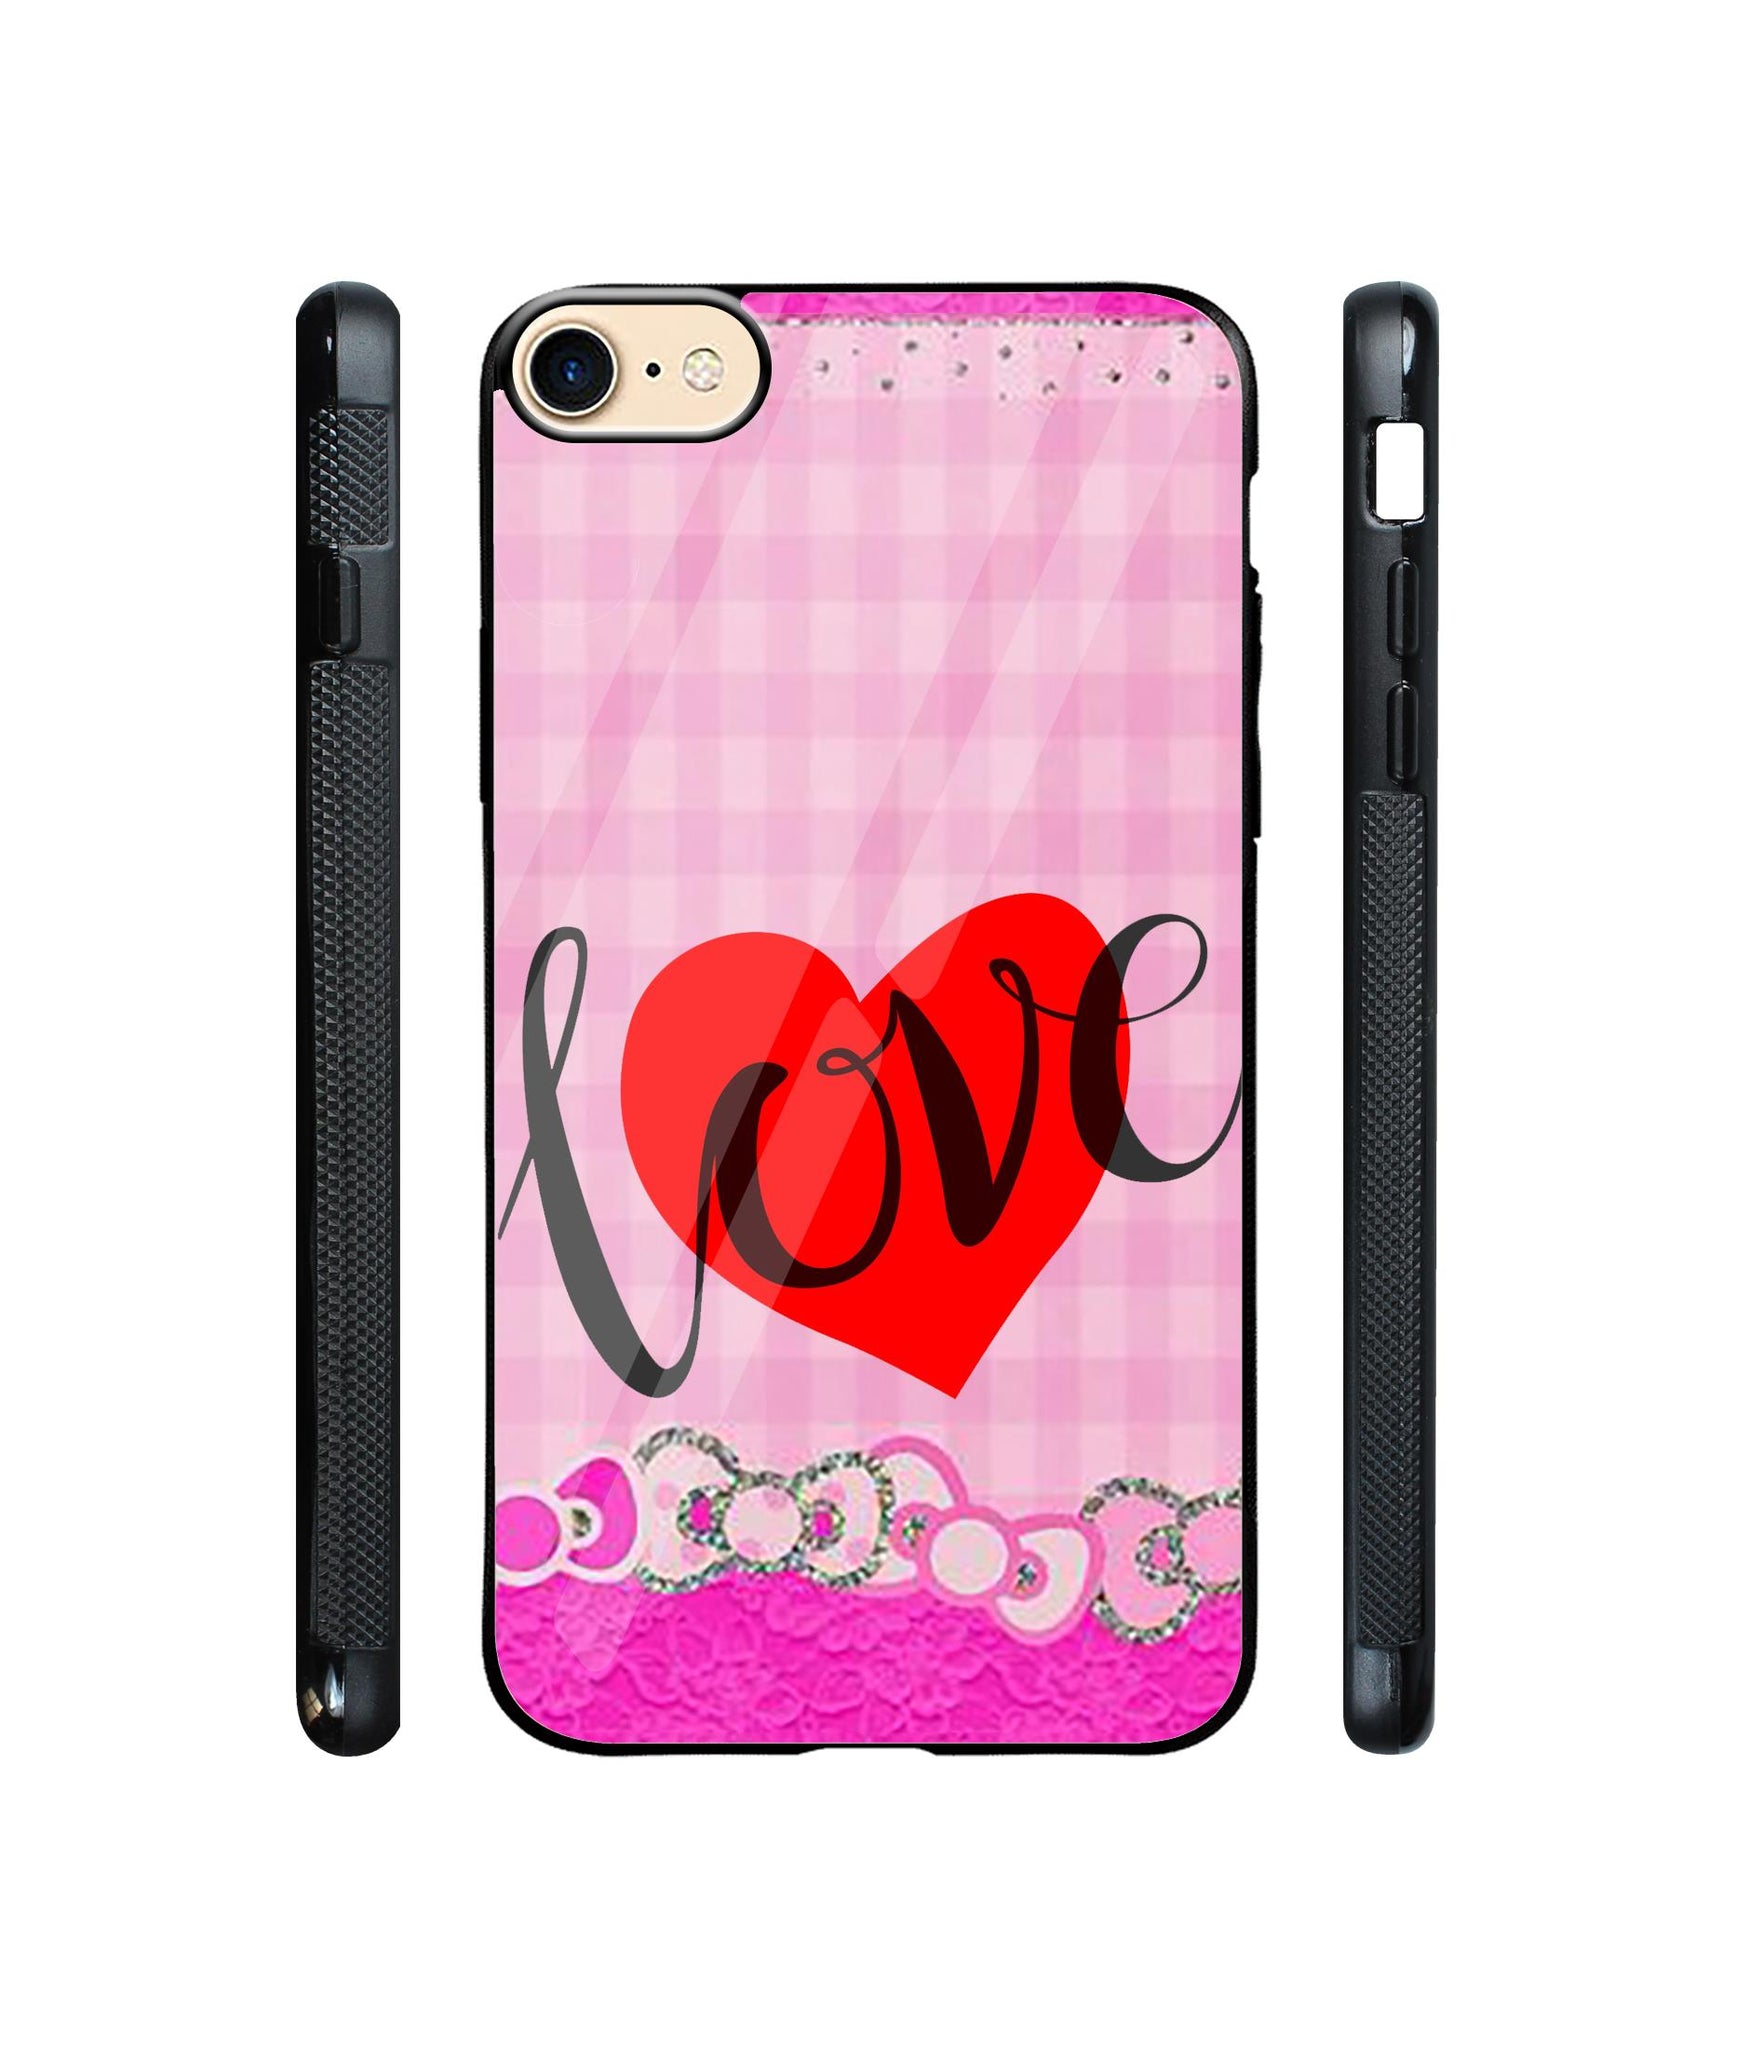 Love Print On Cloth Designer Printed Glass Cover for Apple iPhone 7 / iPhone 8